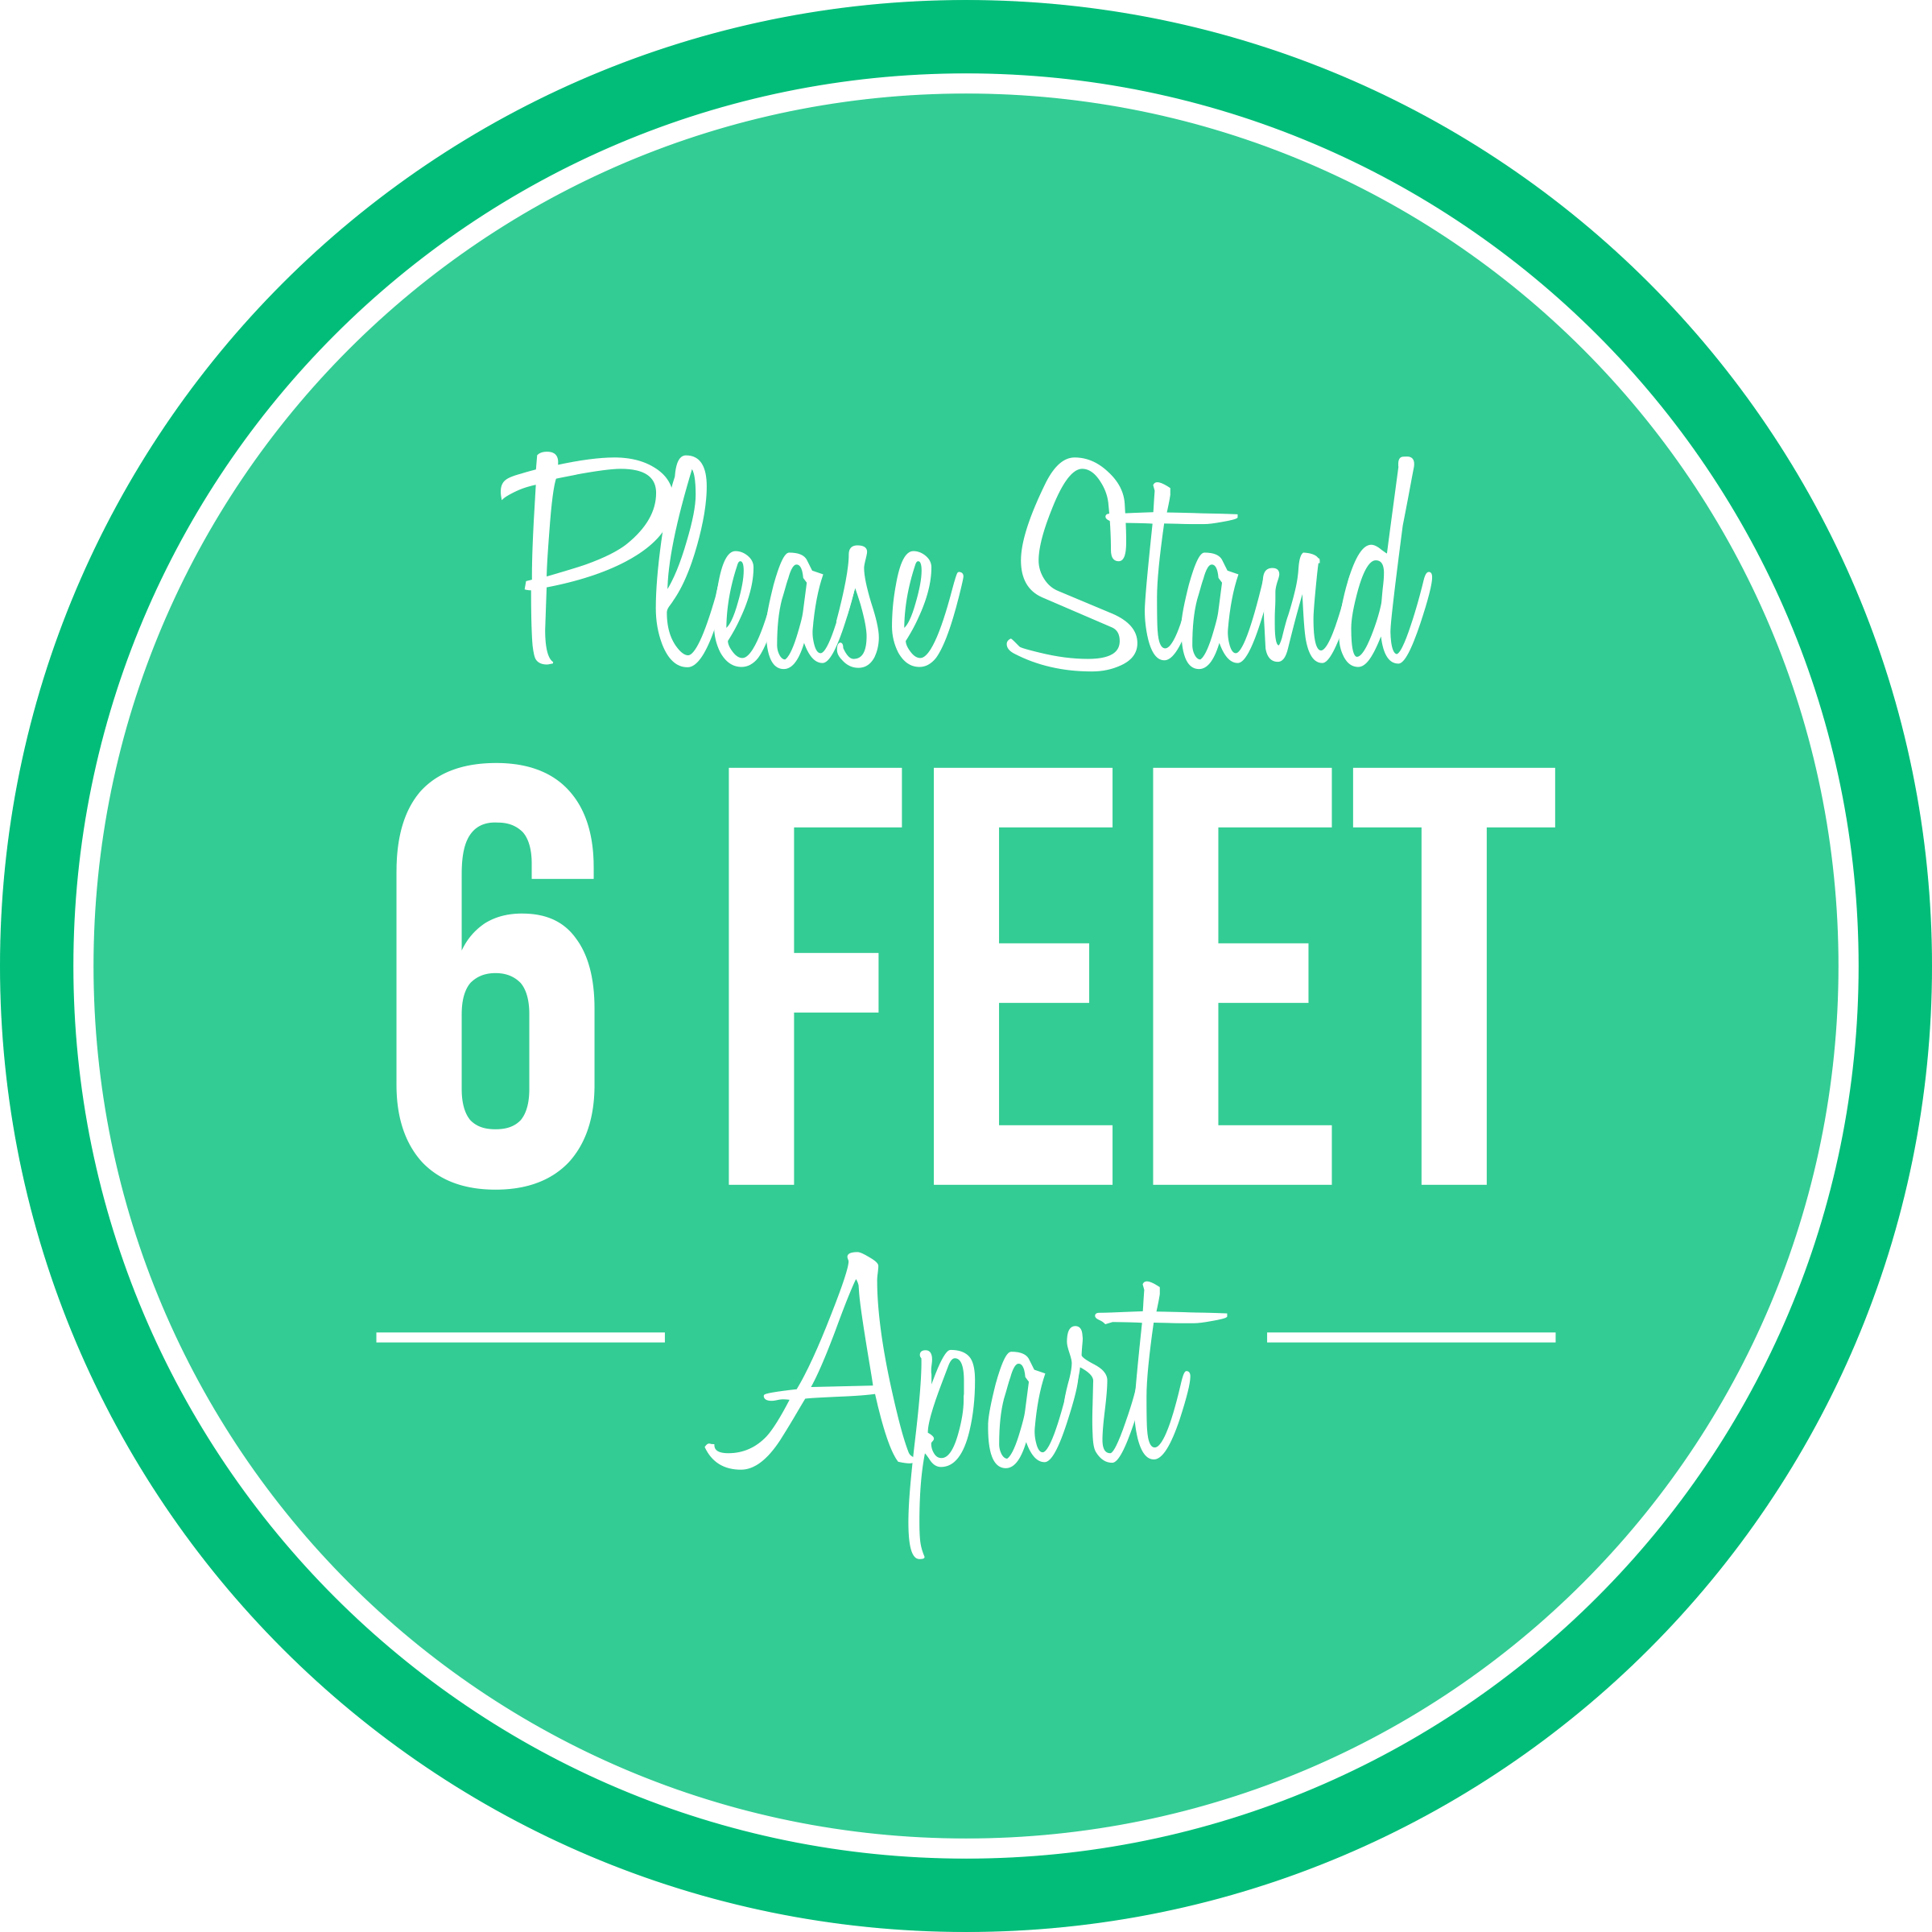 Please Stand 6 Feet Apart Business Reopening Floor Decal